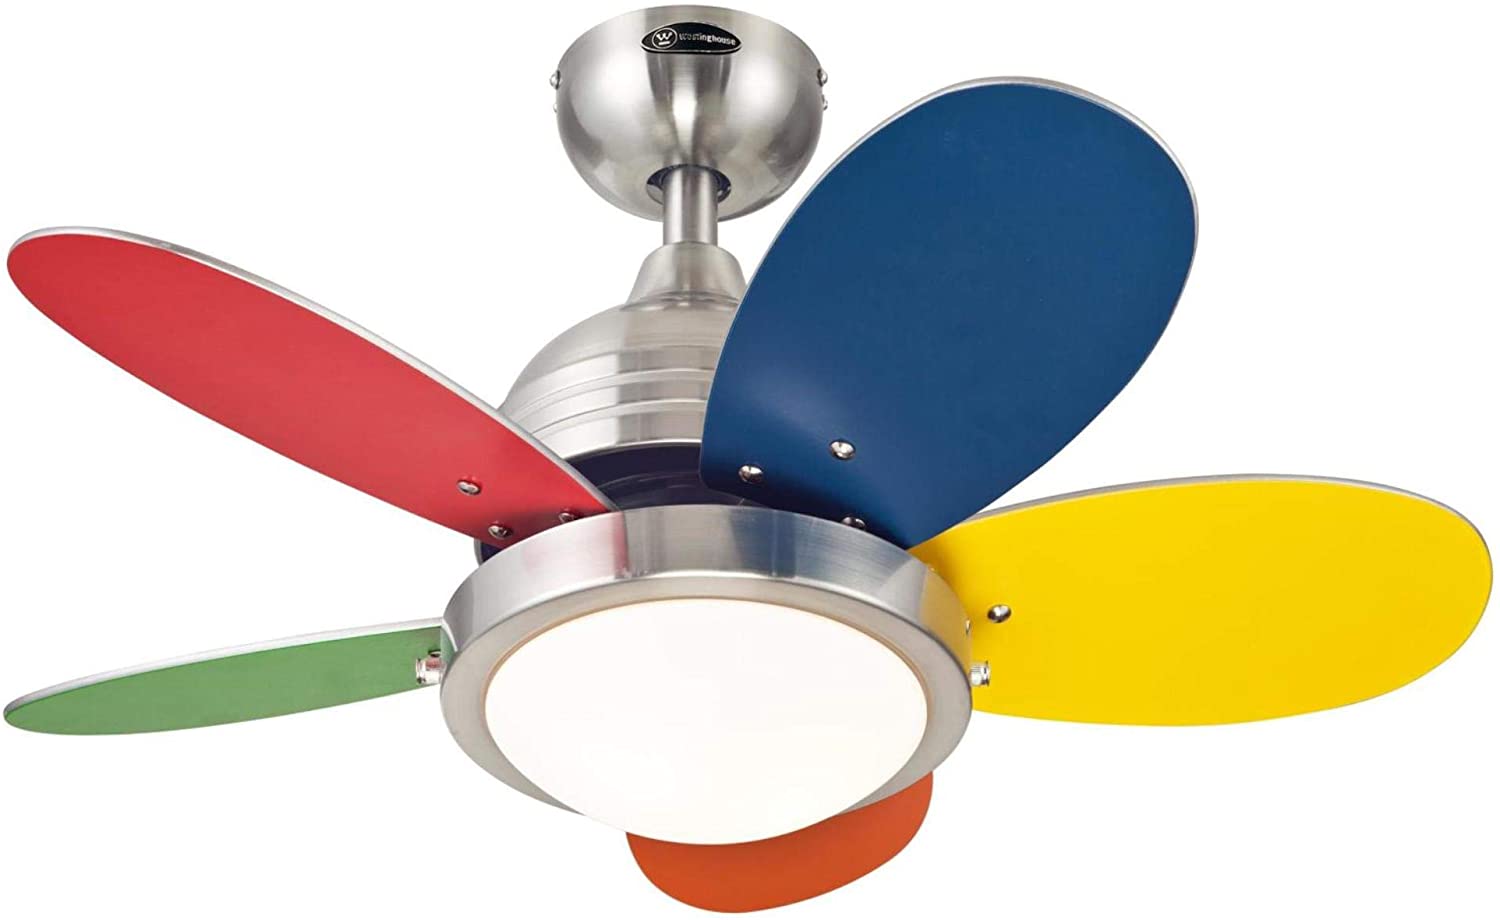 Westinghouse Lighting 7223600 Roundabout 30-Inch Indoor Ceiling Fan with Dimmable LED Light Fixture Brushed Nickel Finish with Reversible Multi-Color/White Blades, Opal Frosted Glass